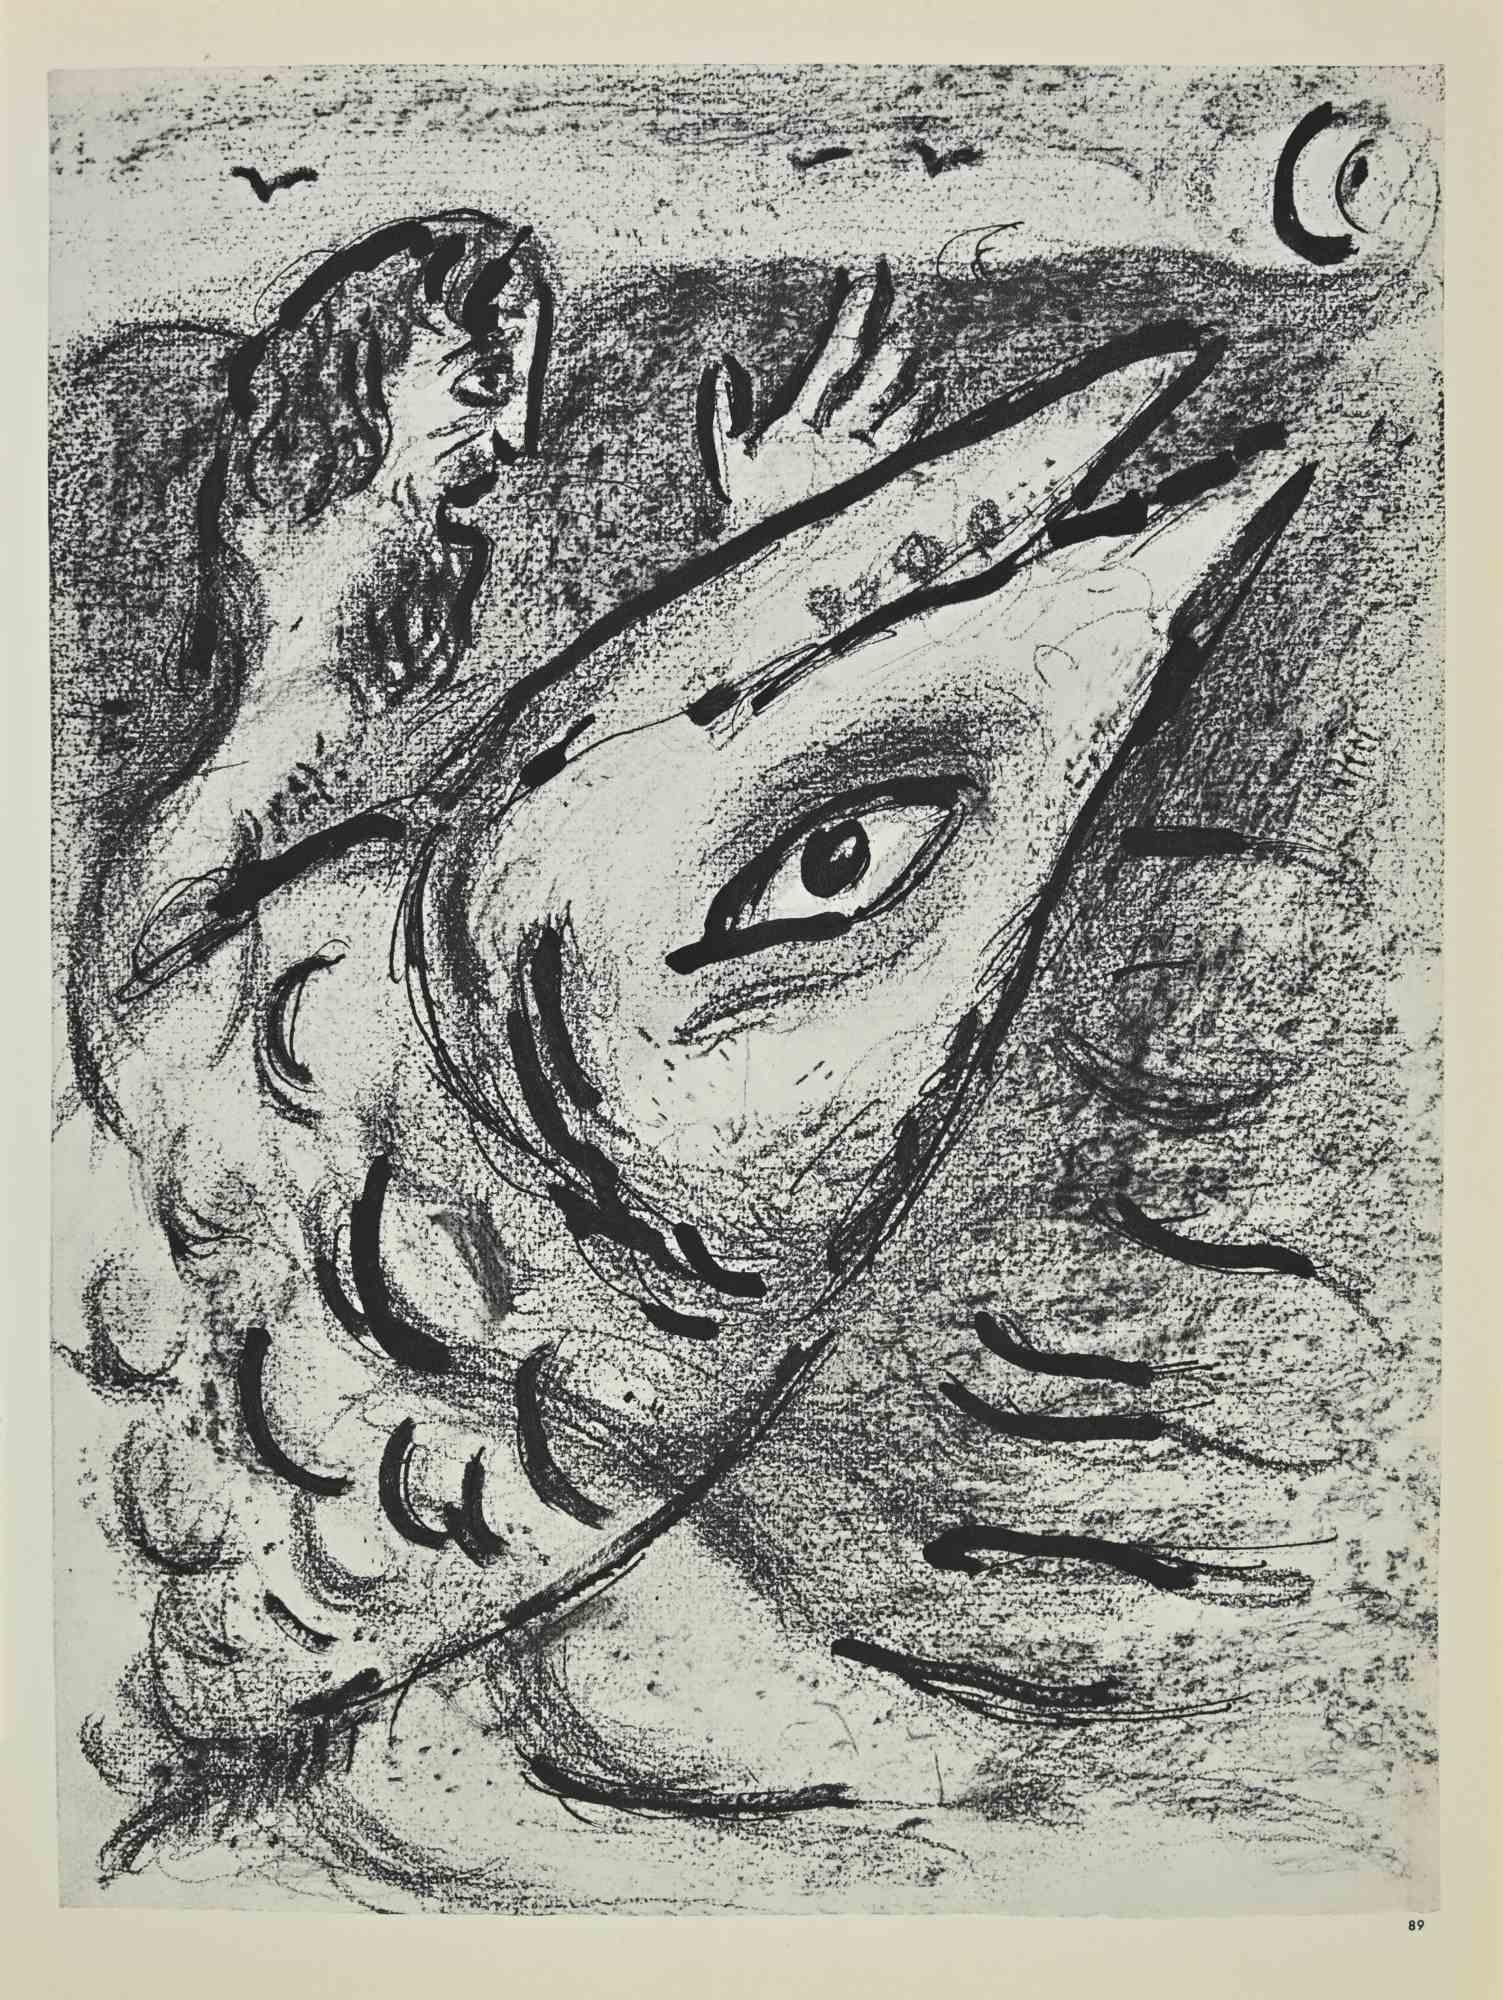 Micah speaks to the daughter  is an artwork realized by Marc Chagall, 1960s. 

Jonas and the whale is an artwork realized by Marc Chagall, 1960s. 

Lithograph on brown-toned paper, no signature.

Lithograph on both sheets.

Edition of 6500 unsigned